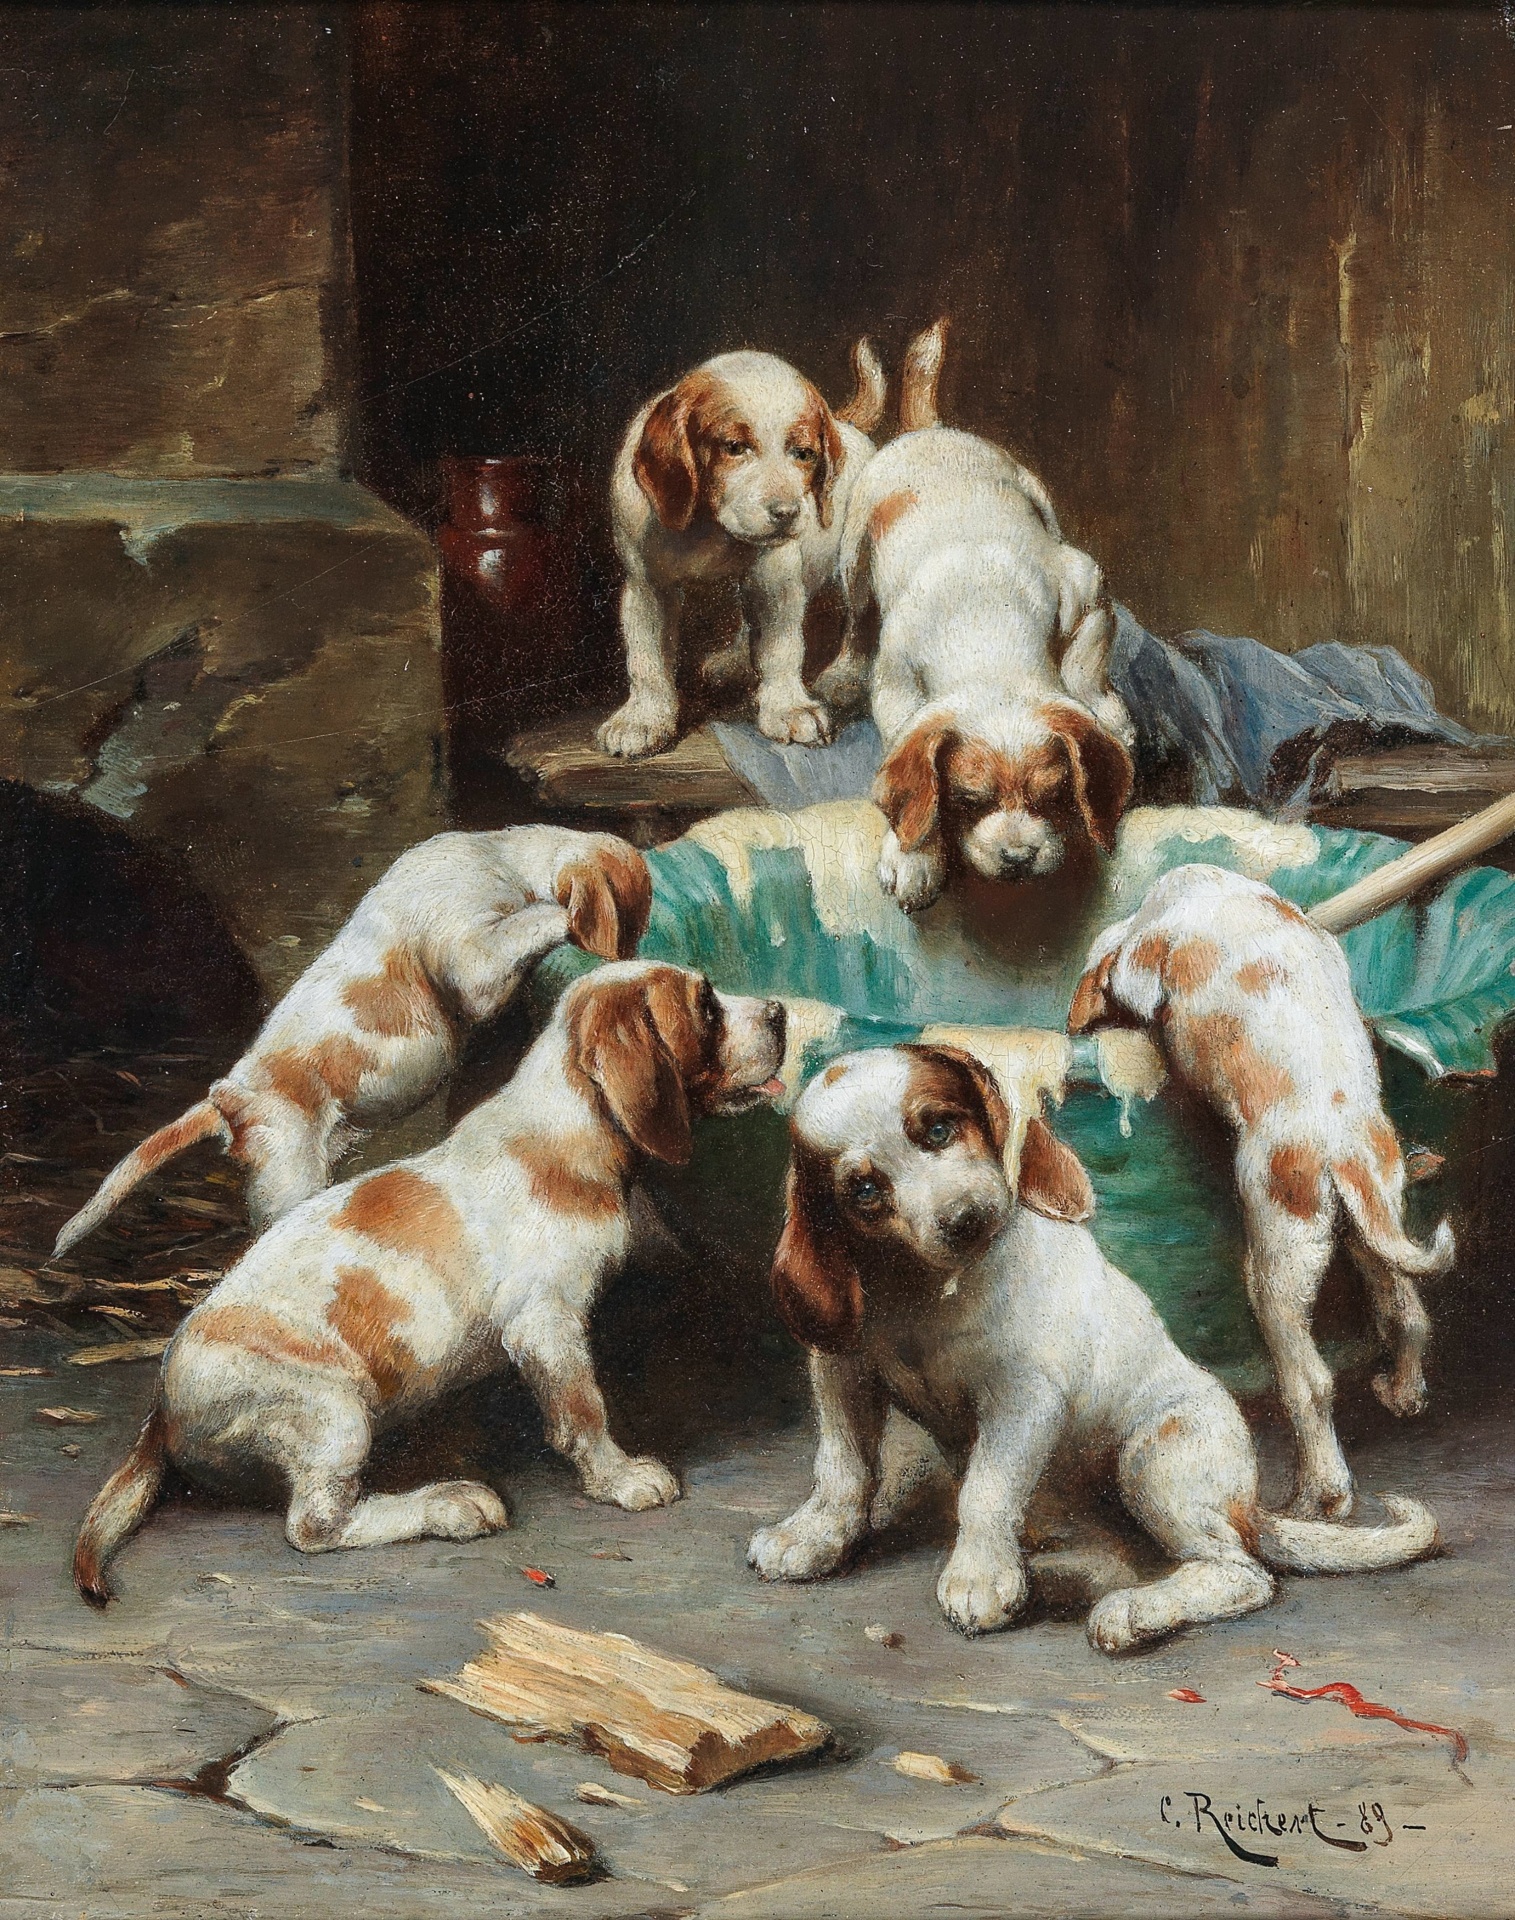 Dogs Puppies Beagle Vintage illustration old antique painting painting by Reichert from 1889